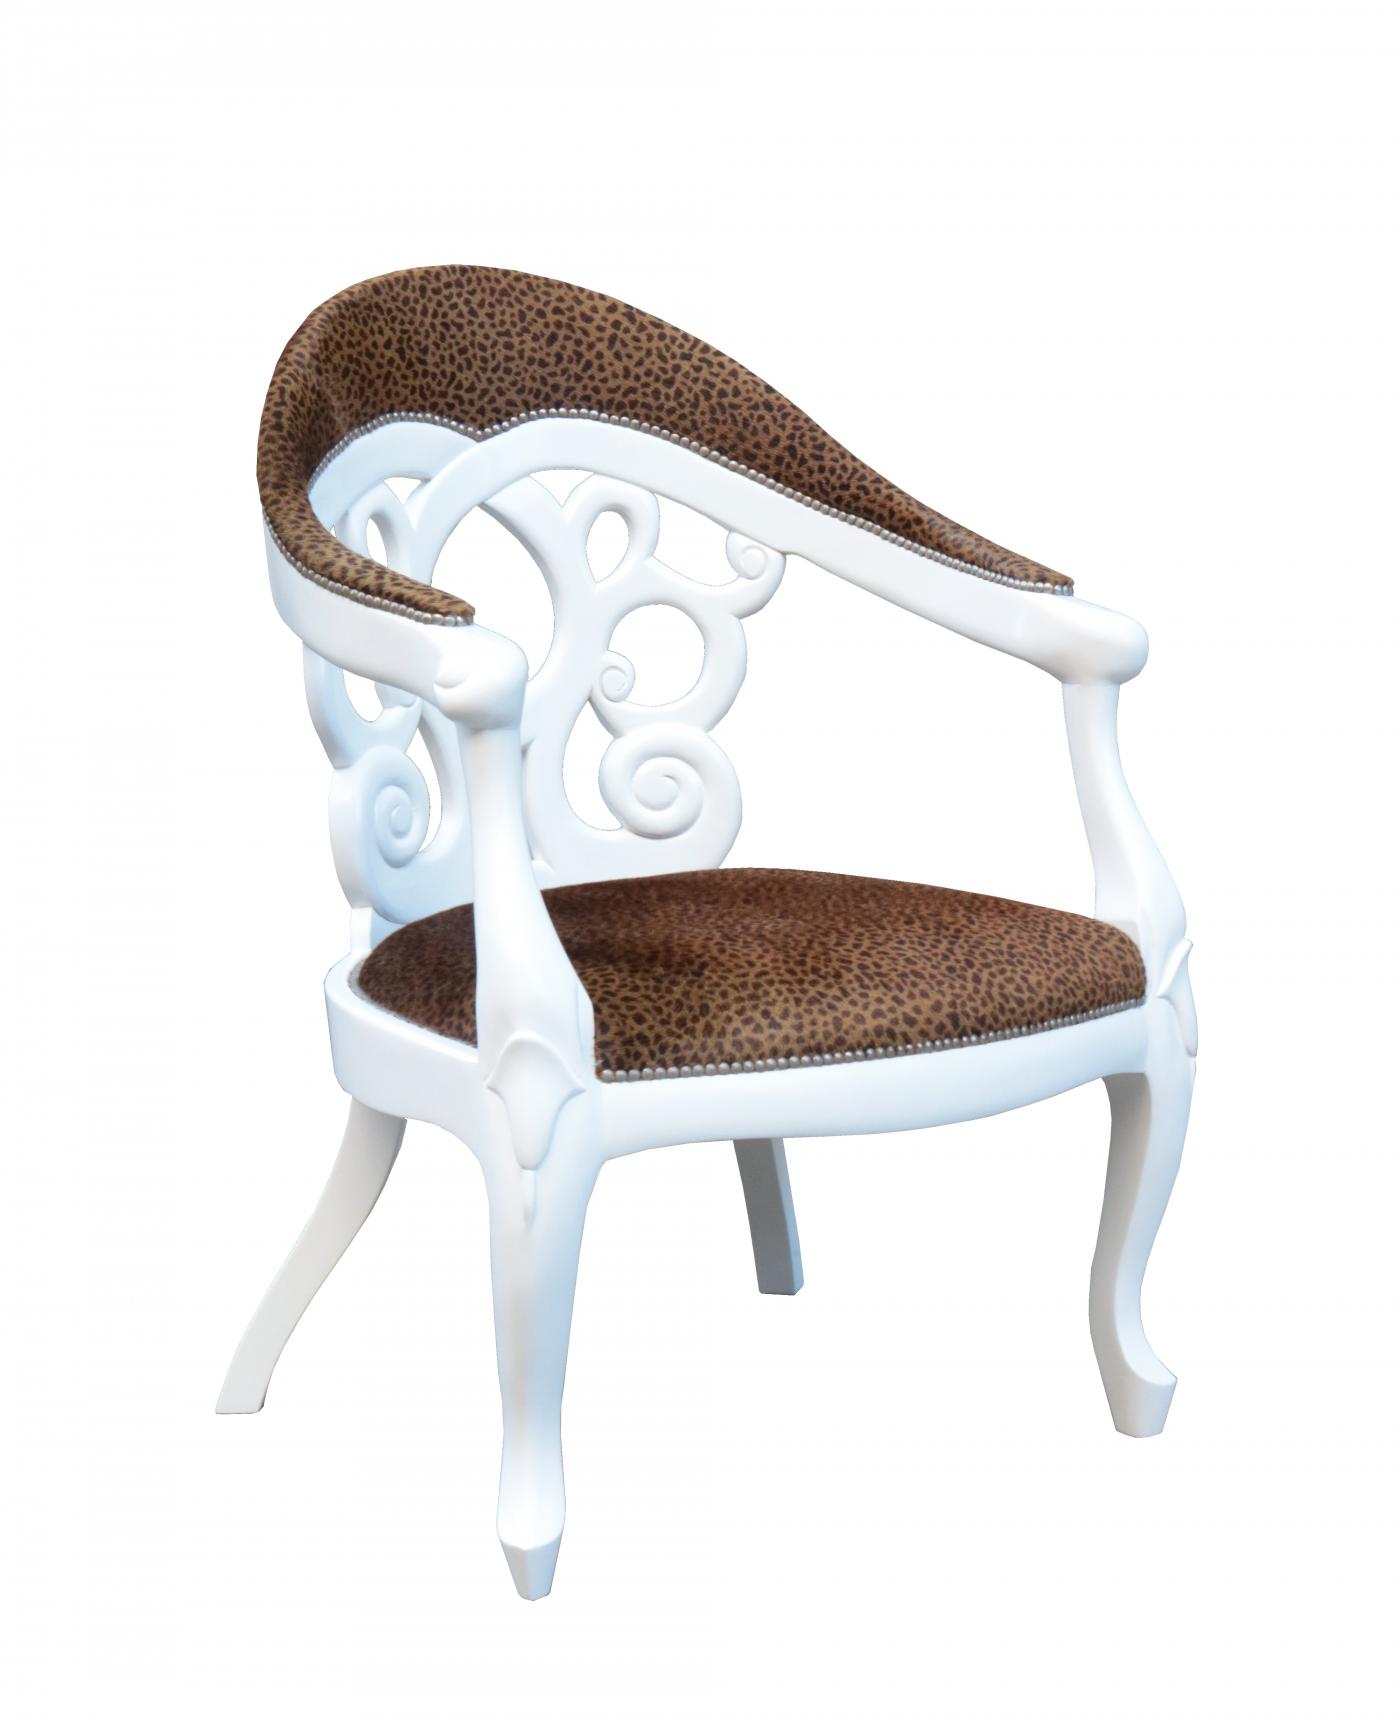 Pair of Armchairs designed by David Barrett. Solid wood in white Lacquer.